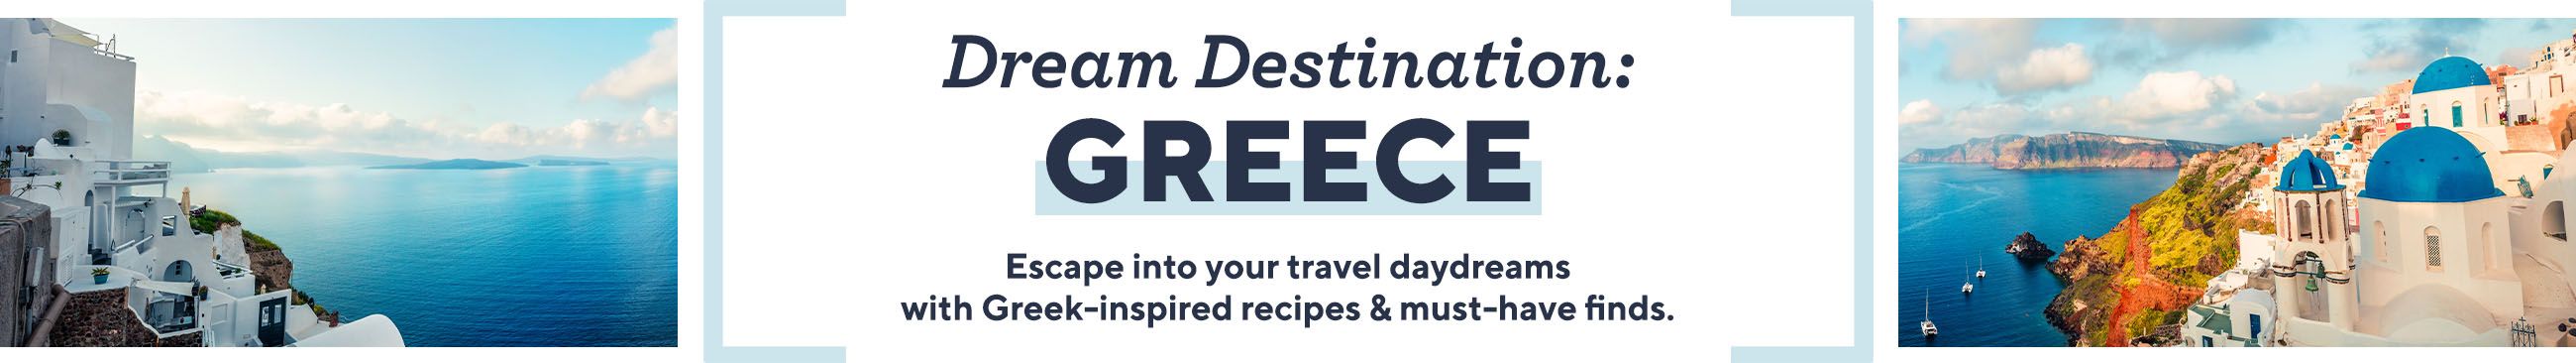 Dream Destination: Greece  Escape into your travel daydreams with Greek-inspired recipes & must-have finds.